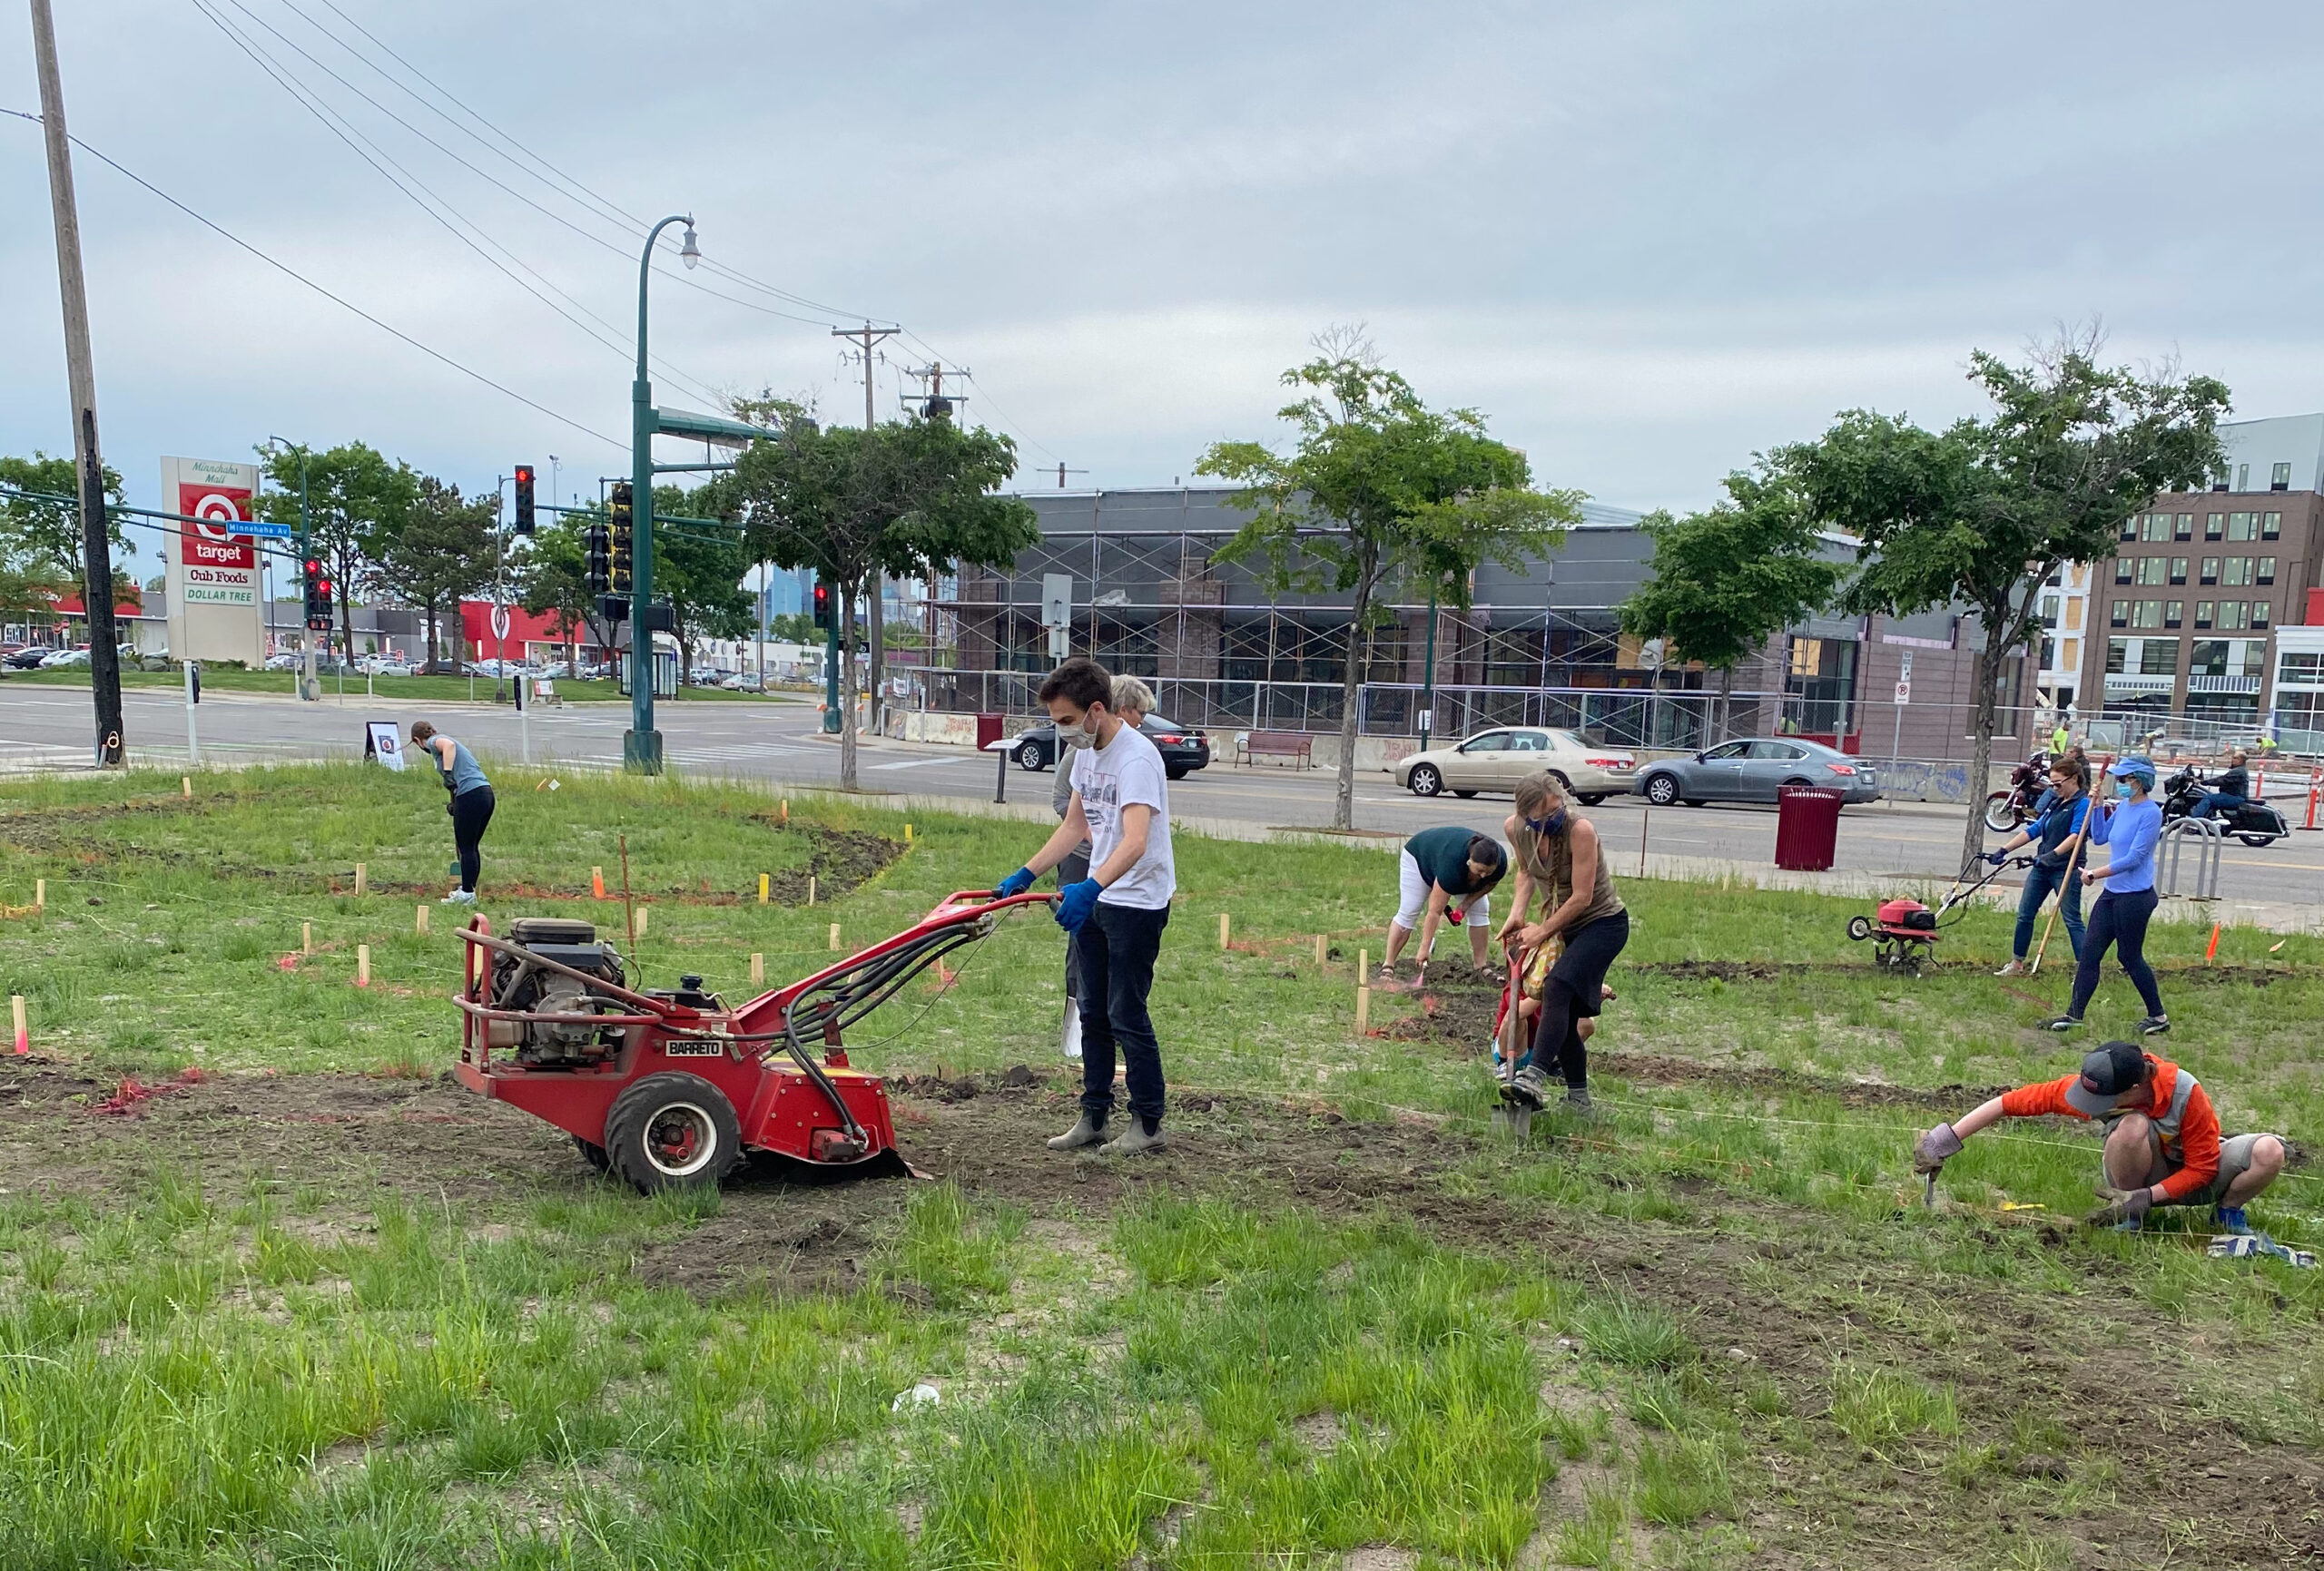 Multiple people work together to till, dig and tend to the grass and dirt, on a patch of land near Lake Street in Minneapolis.